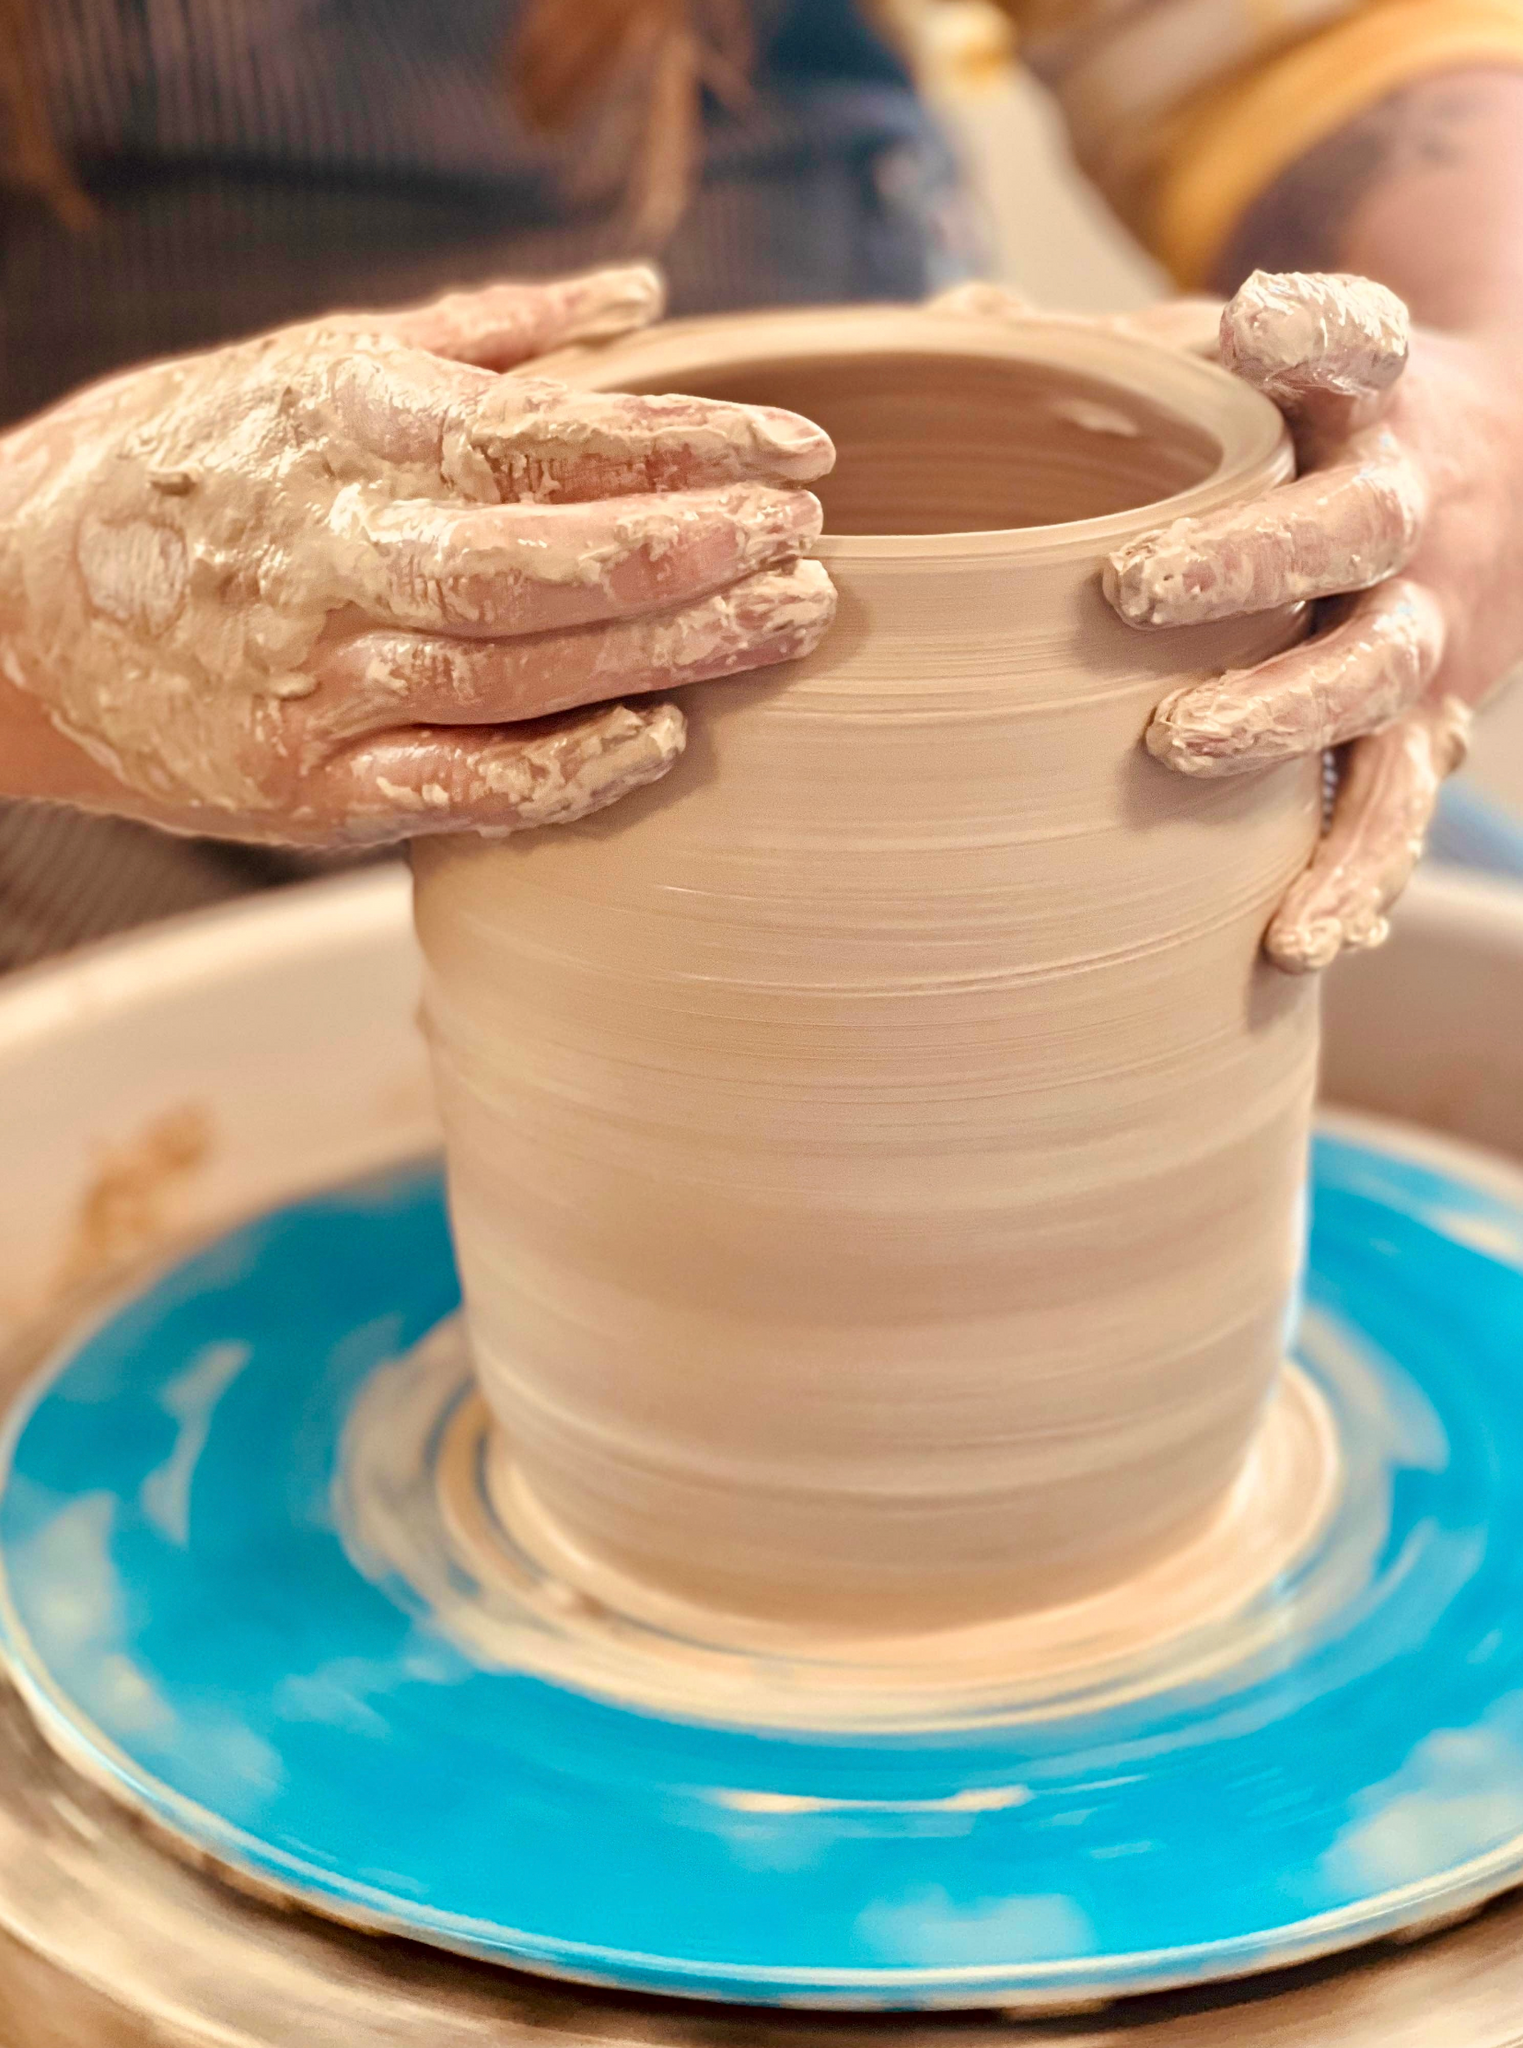 Haptic Ceramics and Mindfulness Workshop with Cheri Owen | March 16th and 17th, 4PM - 7PM